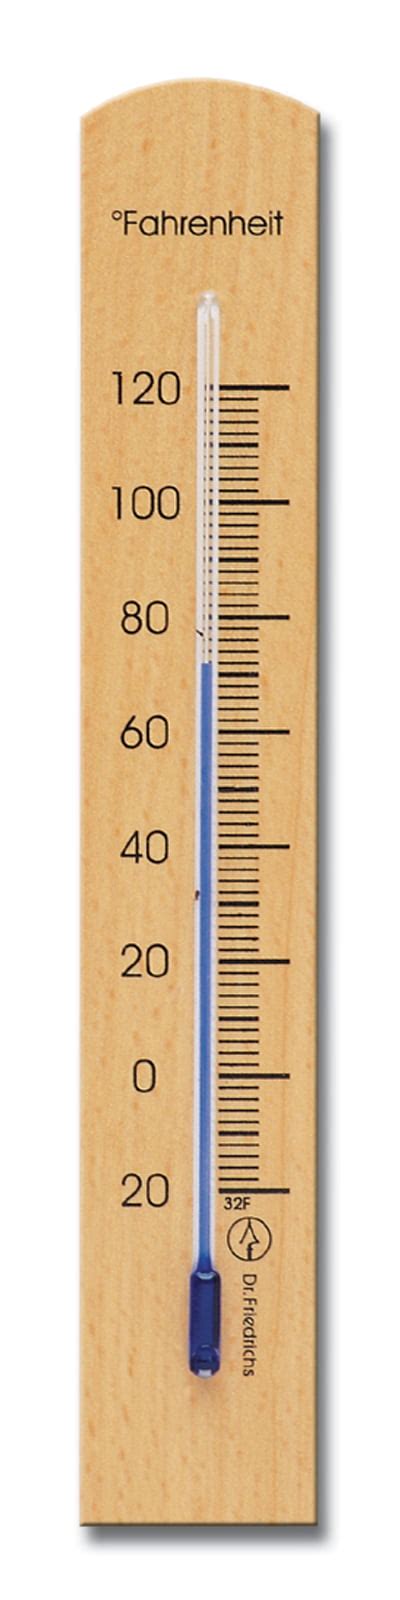 Wall Thermometer 712 Inch Beechwood Natural Finish